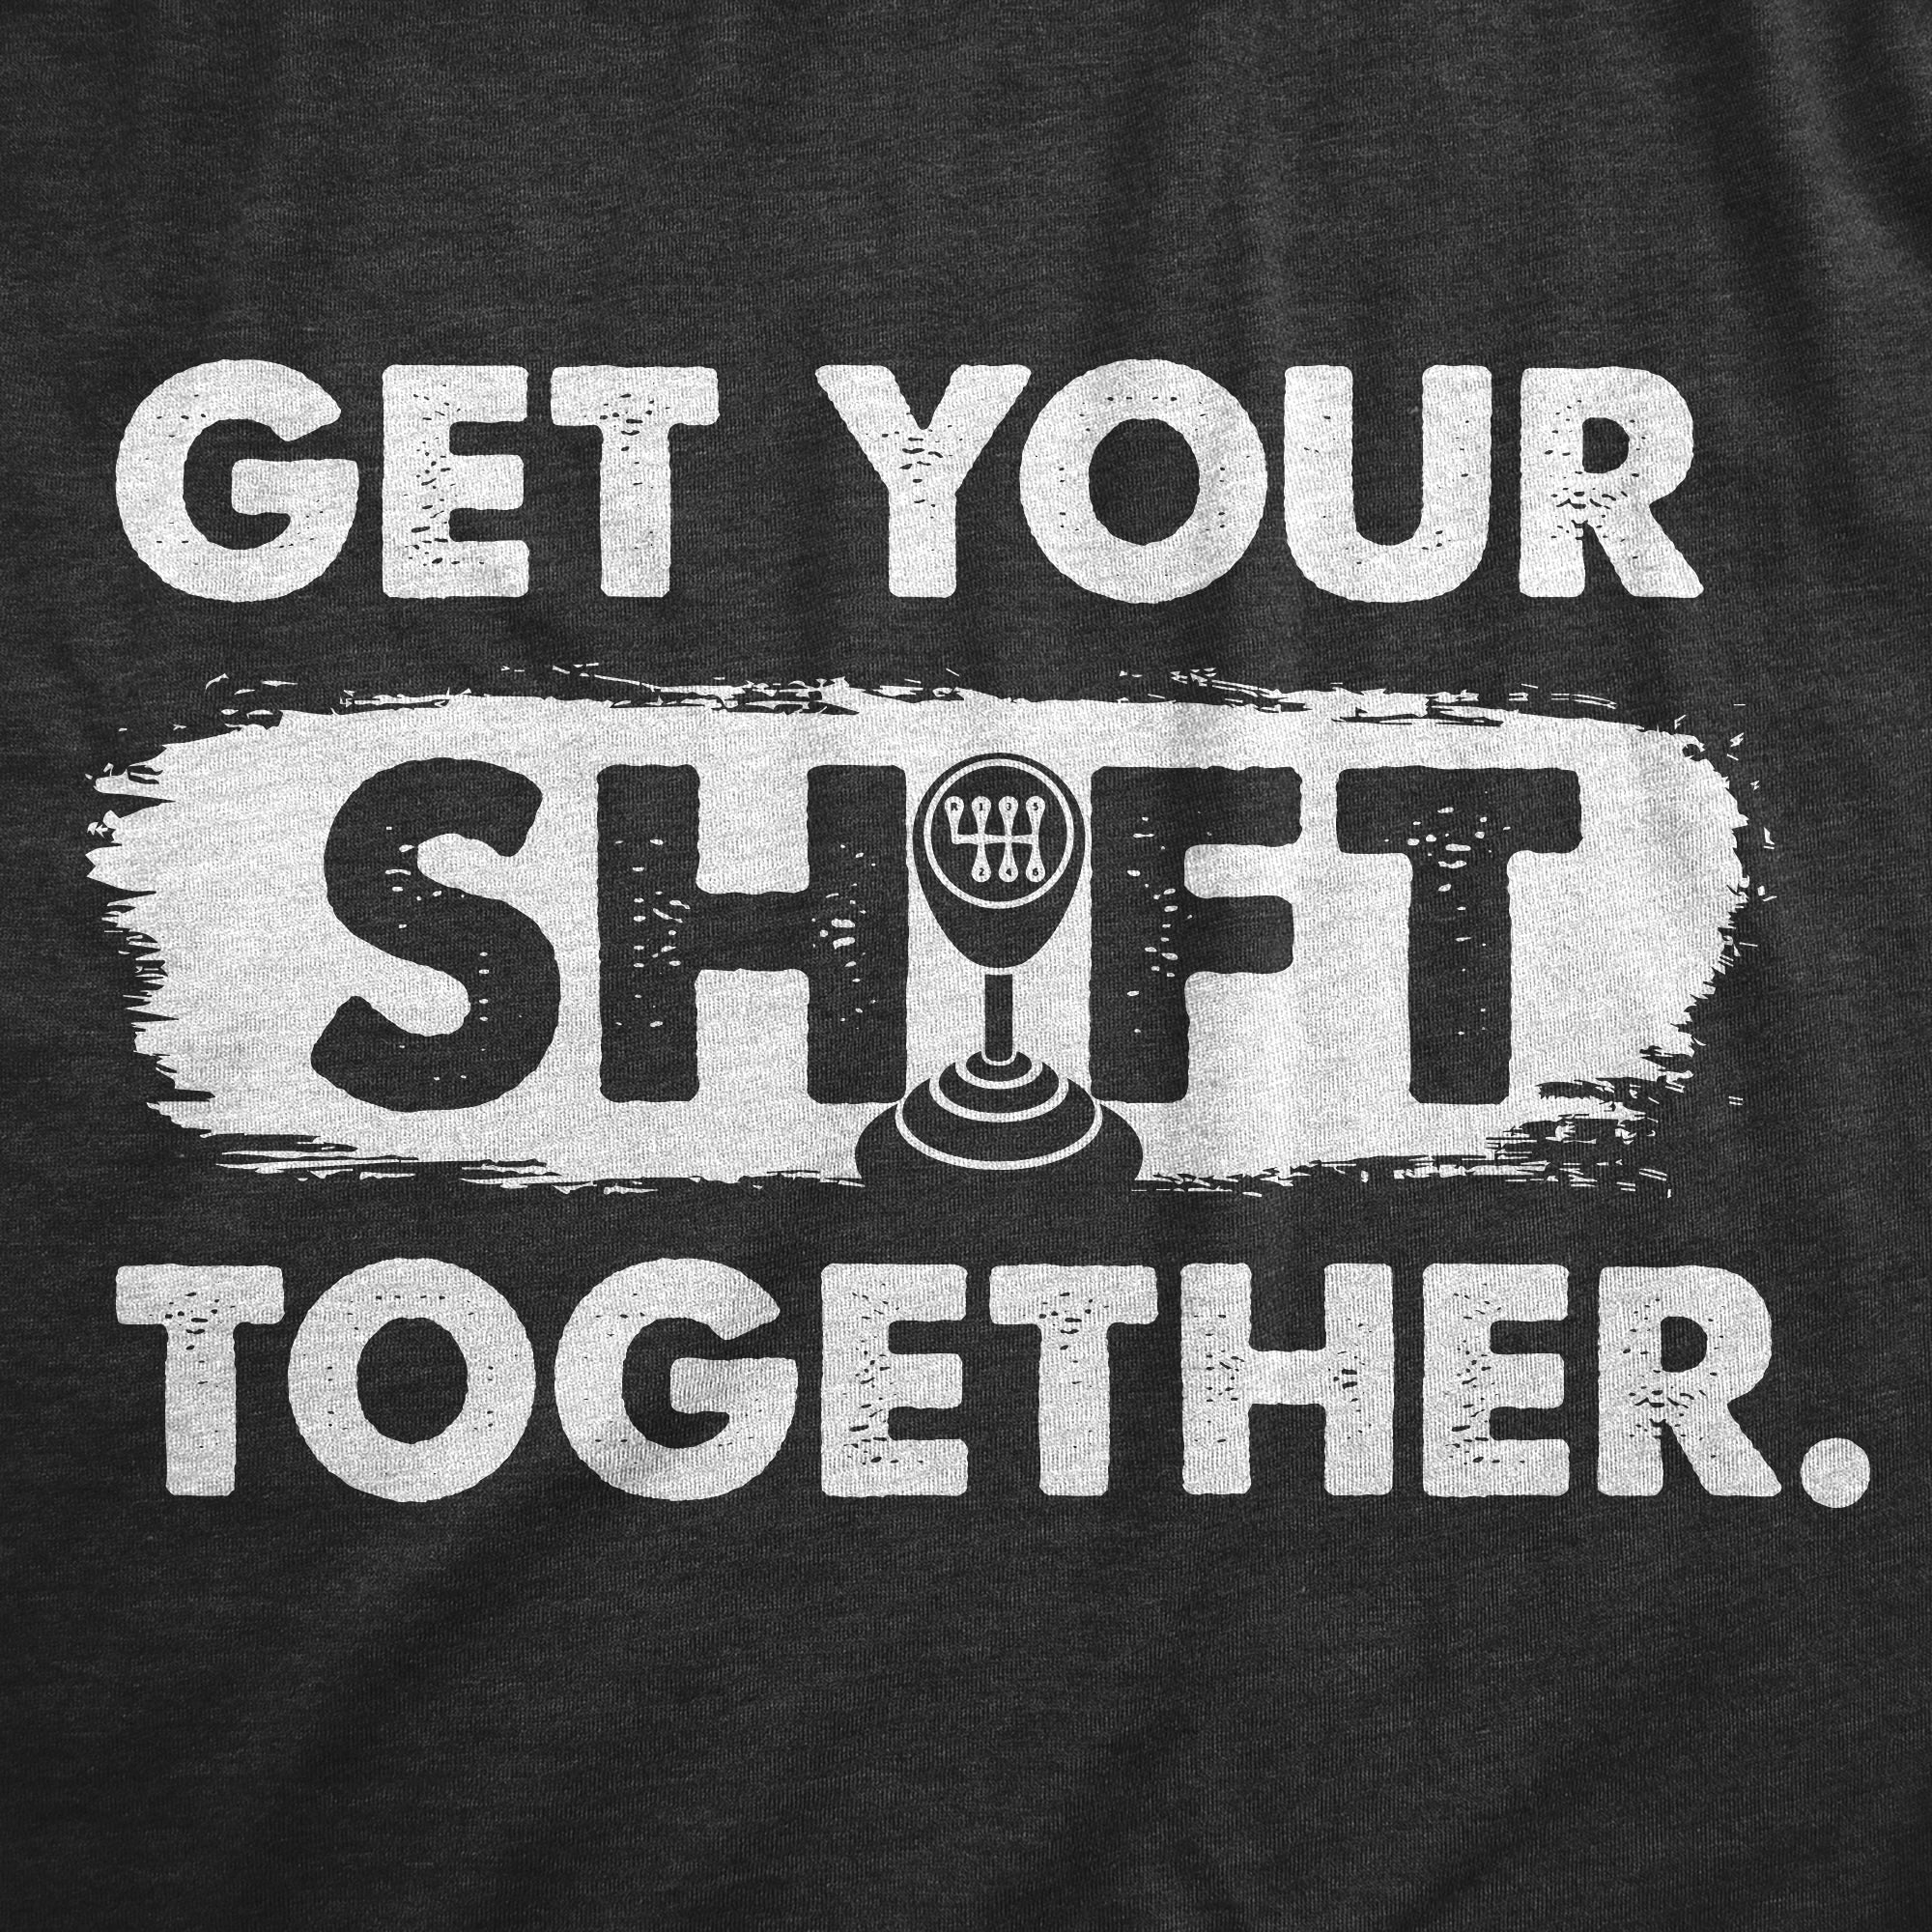 Funny Heather Black - SHIFT Get Your Shift Together Mens T Shirt Nerdy Mechanic Tee